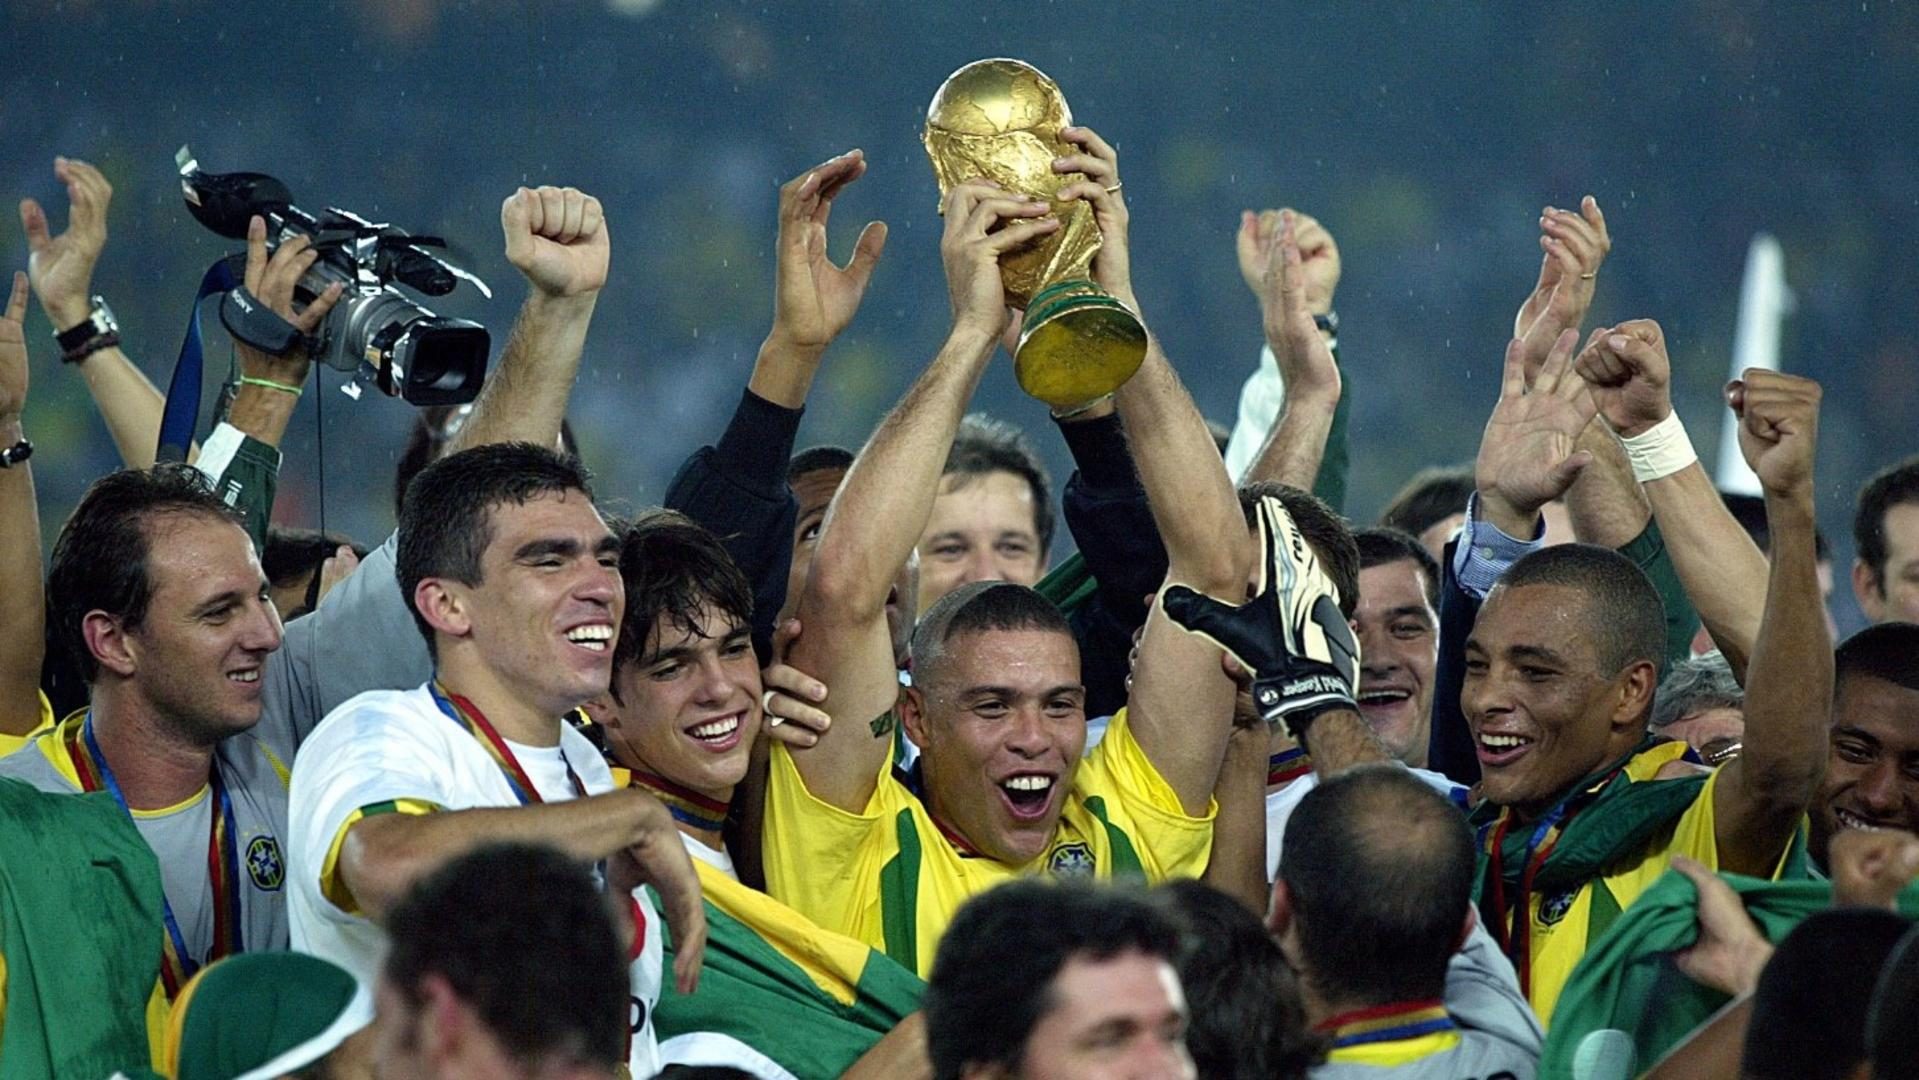 Which country has won the most FIFA World Cups?